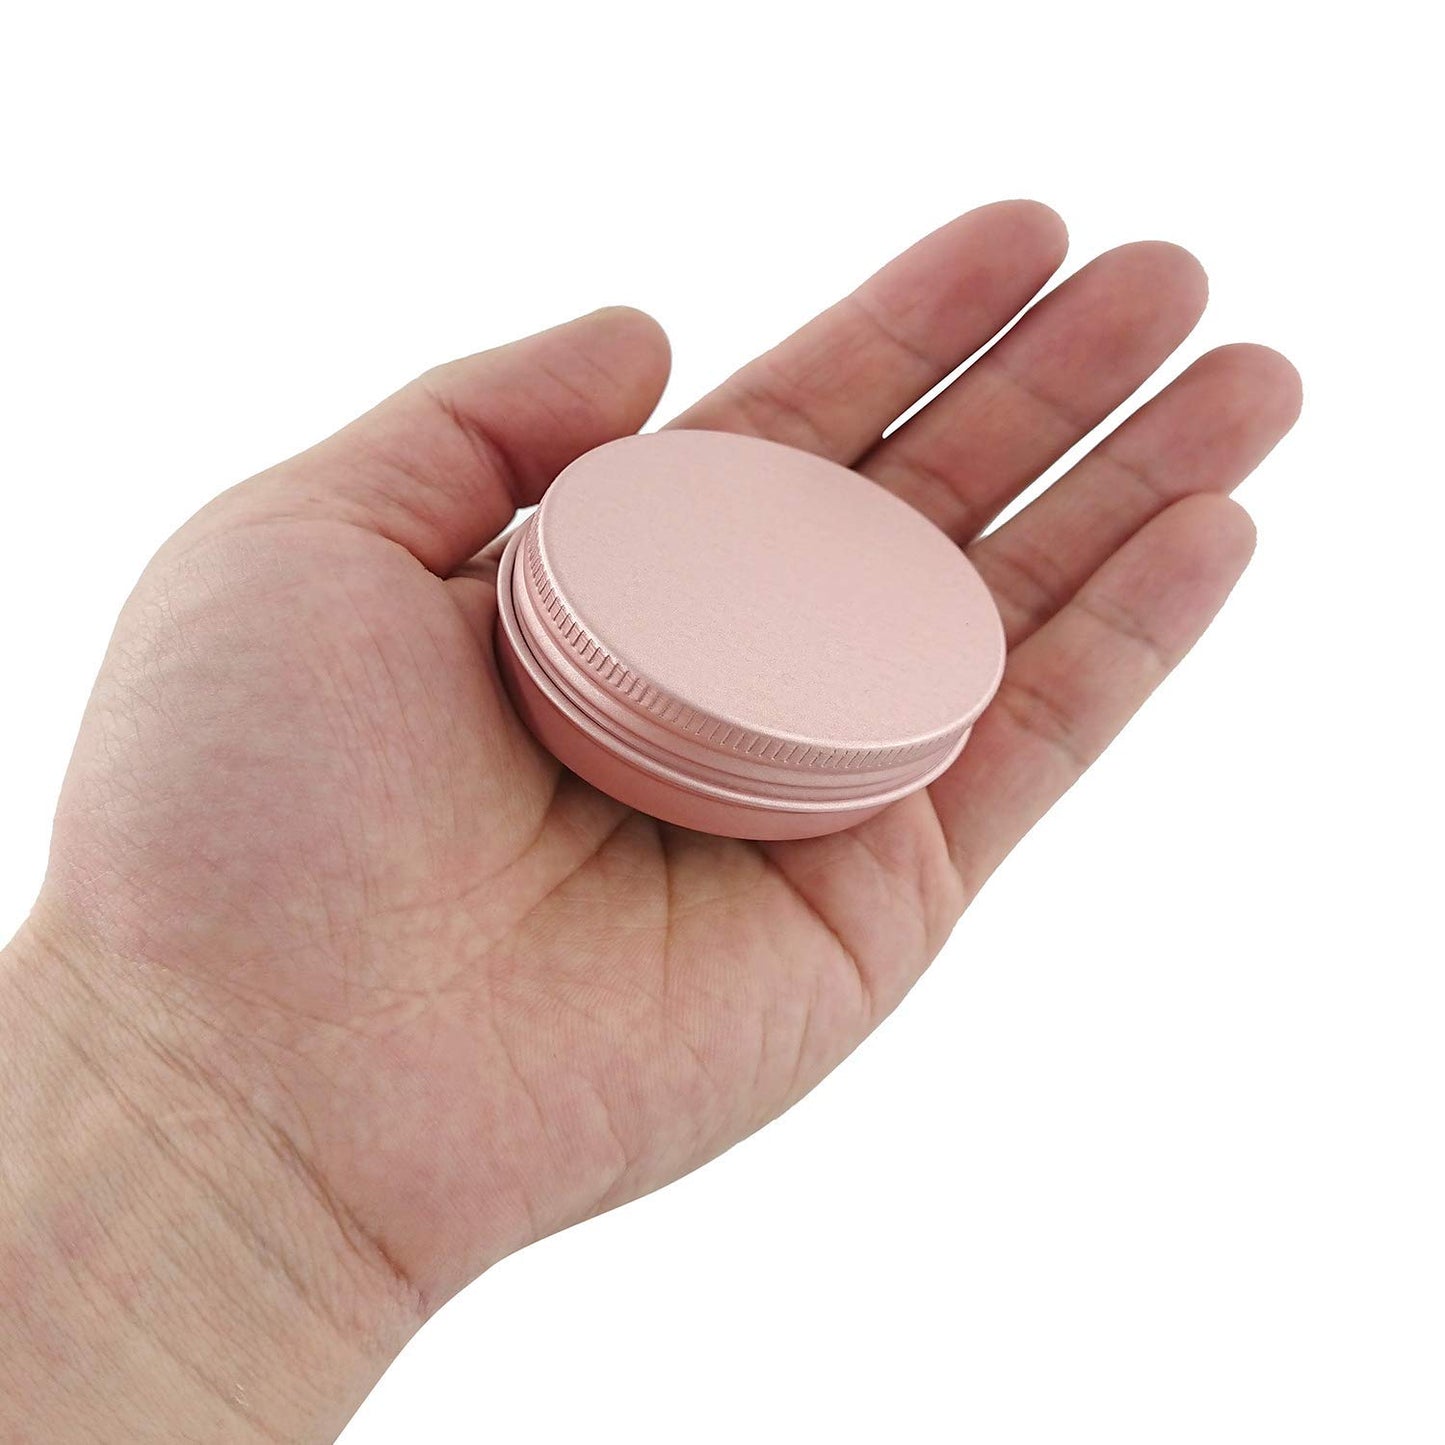 1 Ounce Aluminum Tin Jar Refillable Containers 30ml Aluminum Screw Lid Round Tin Container Bottle for Cosmetic, Lip Balm, Cream, 20 Pcs Rose Gold